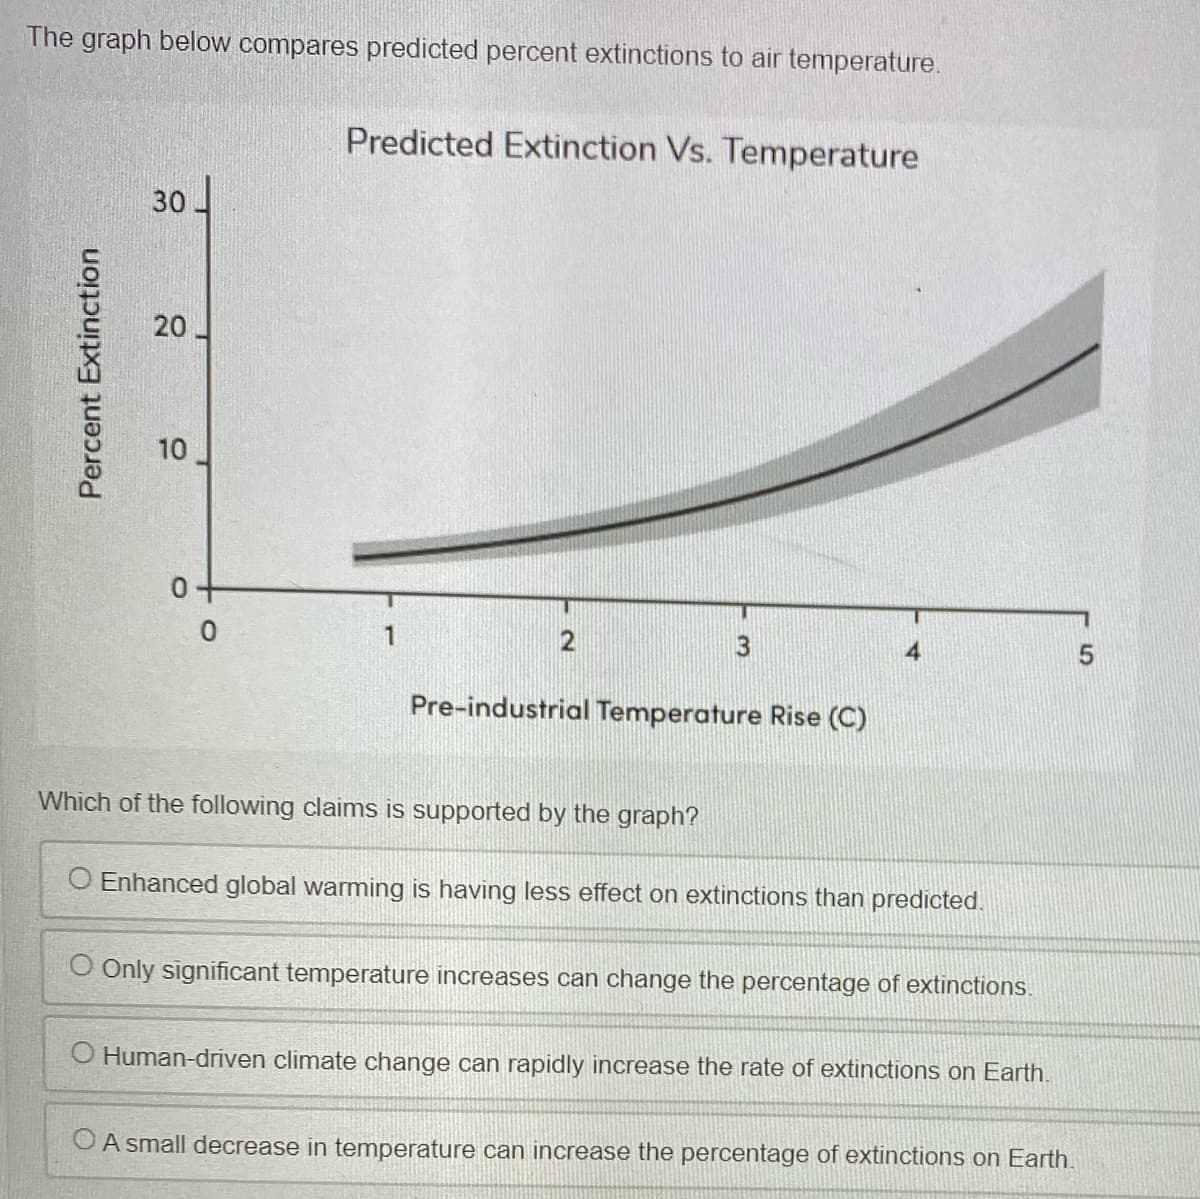 The graph below compares predicted percent extinctions to air temperature.
Predicted Extinction Vs. Temperature
30
0+
0
1
2
3
4
Pre-industrial Temperature Rise (C)
Which of the following claims is supported by the graph?
O Enhanced global warming is having less effect on extinctions than predicted.
O Only significant temperature increases can change the percentage of extinctions.
O Human-driven climate change can rapidly increase the rate of extinctions on Earth.
A small decrease in temperature can increase the percentage of extinctions on Earth.
Percent Extinction
20.
10
5